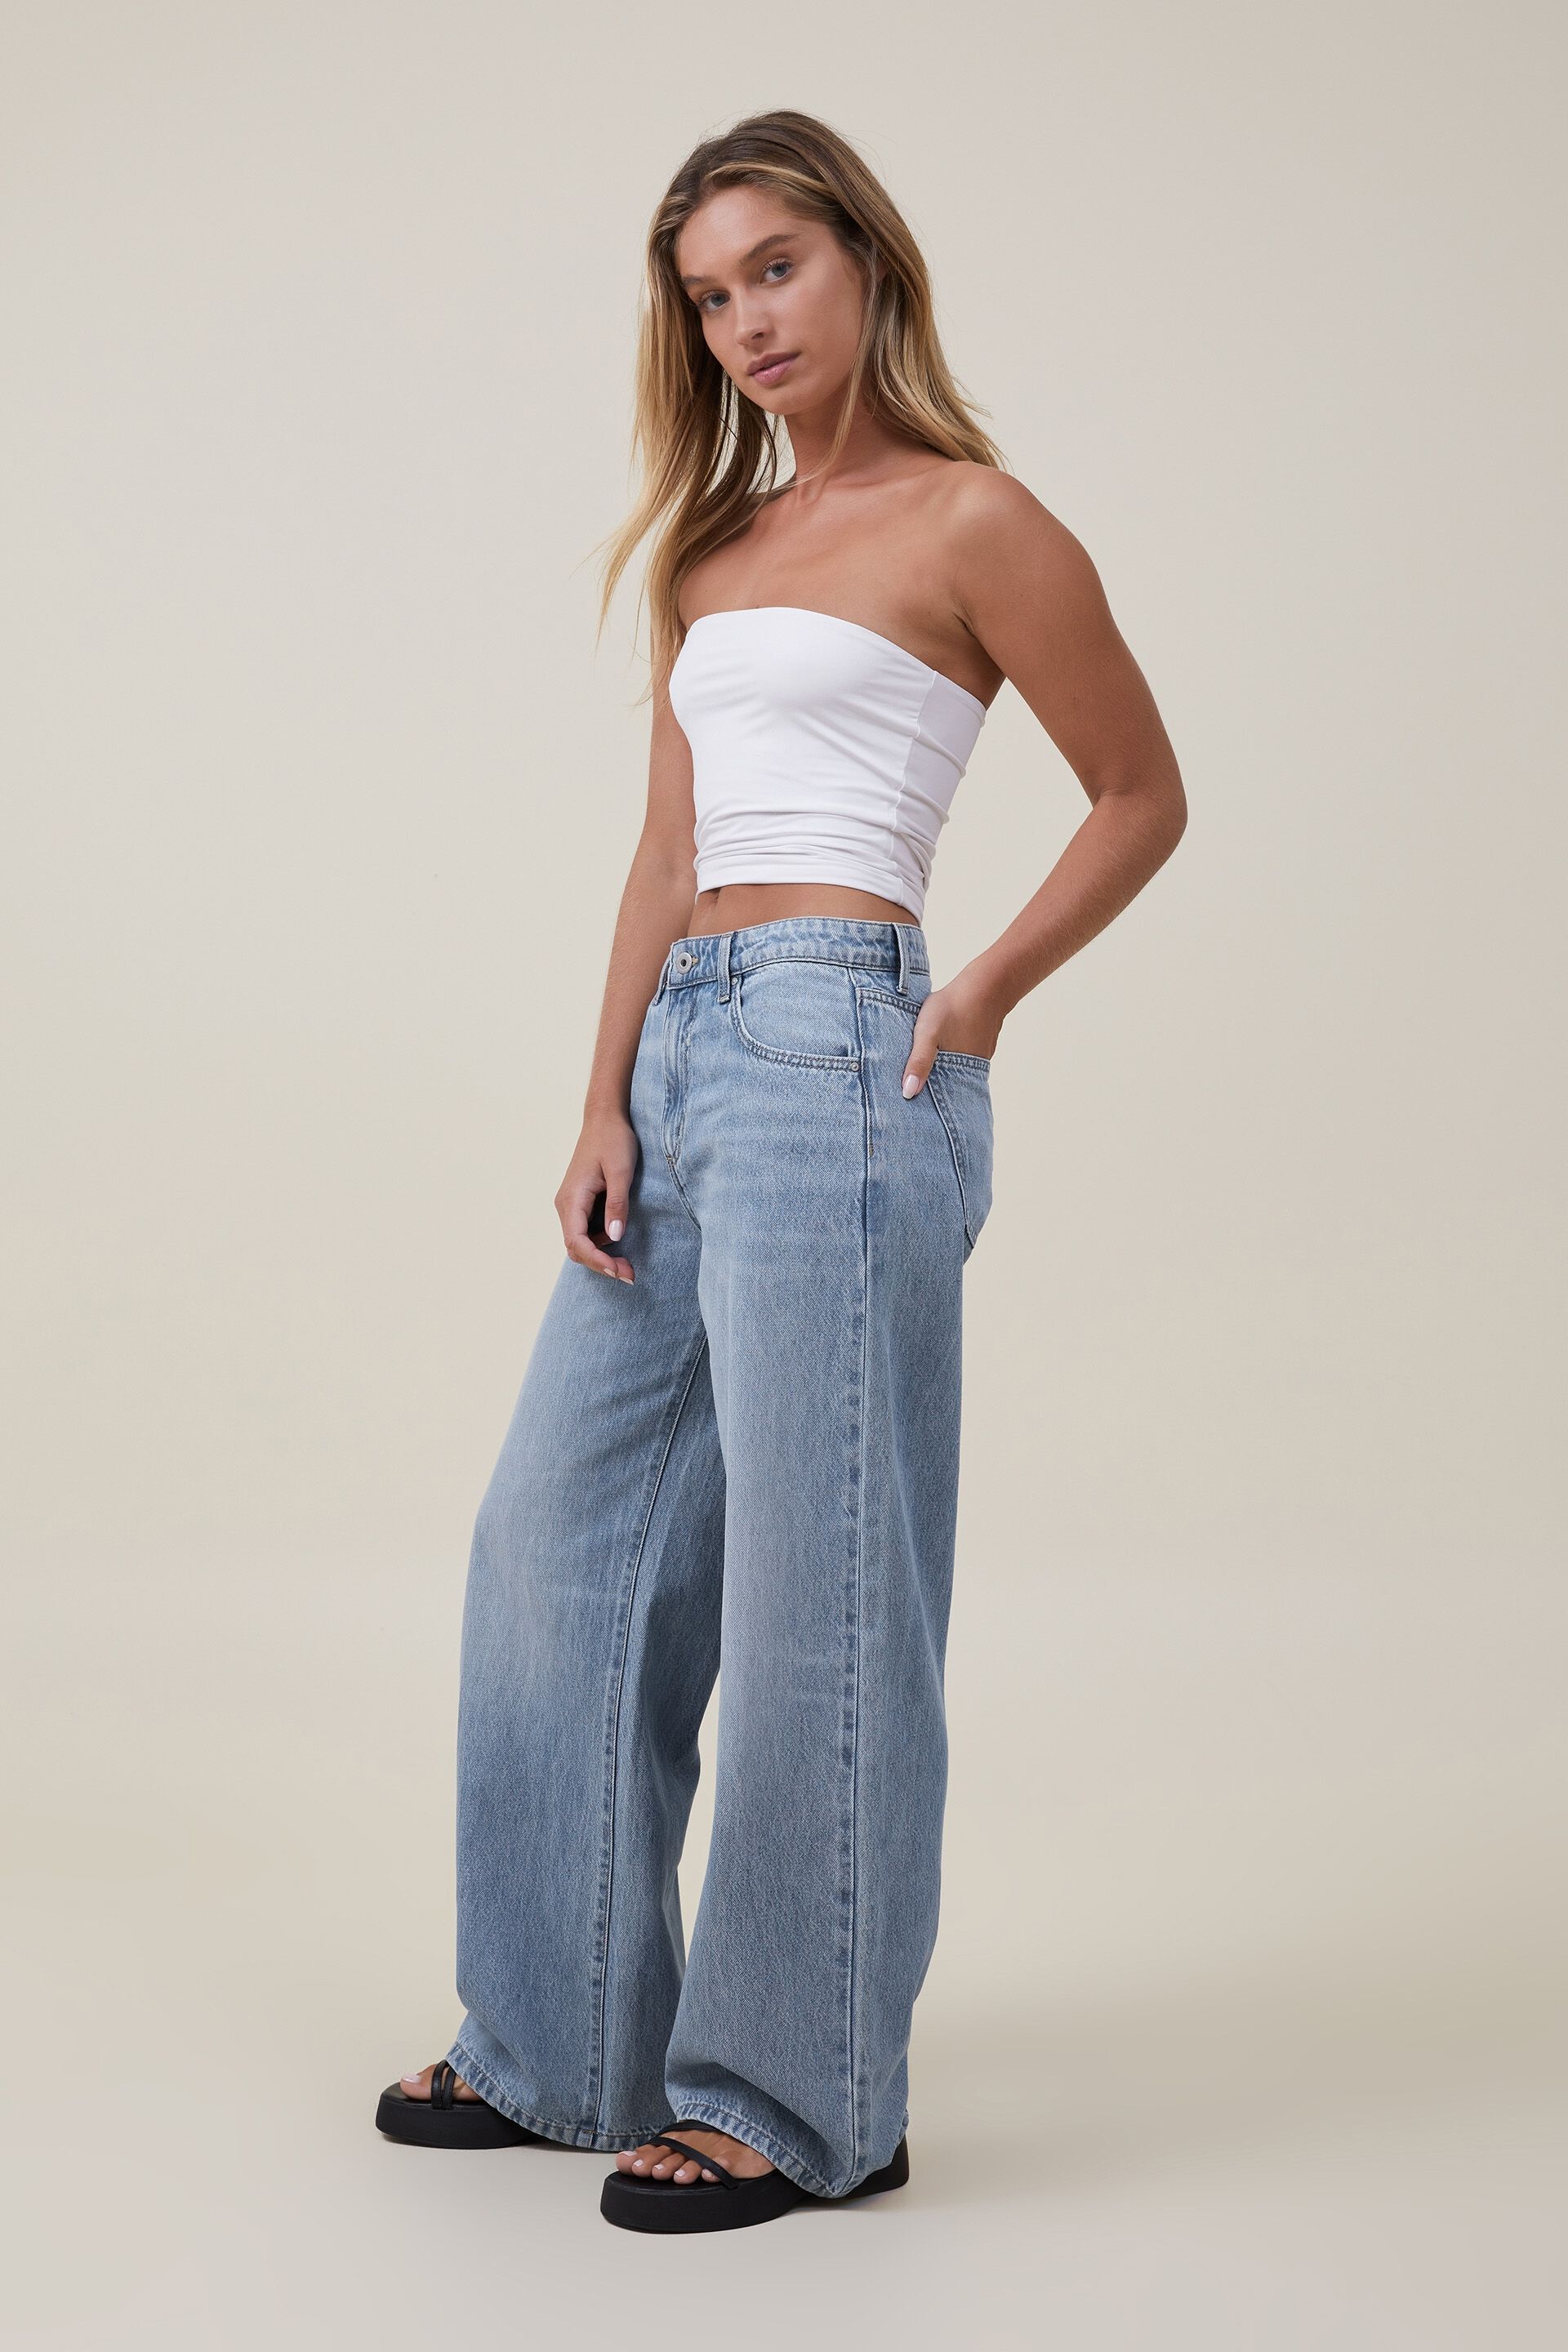 Cotton On Flare Jeans, Women's Fashion, Bottoms, Jeans on Carousell